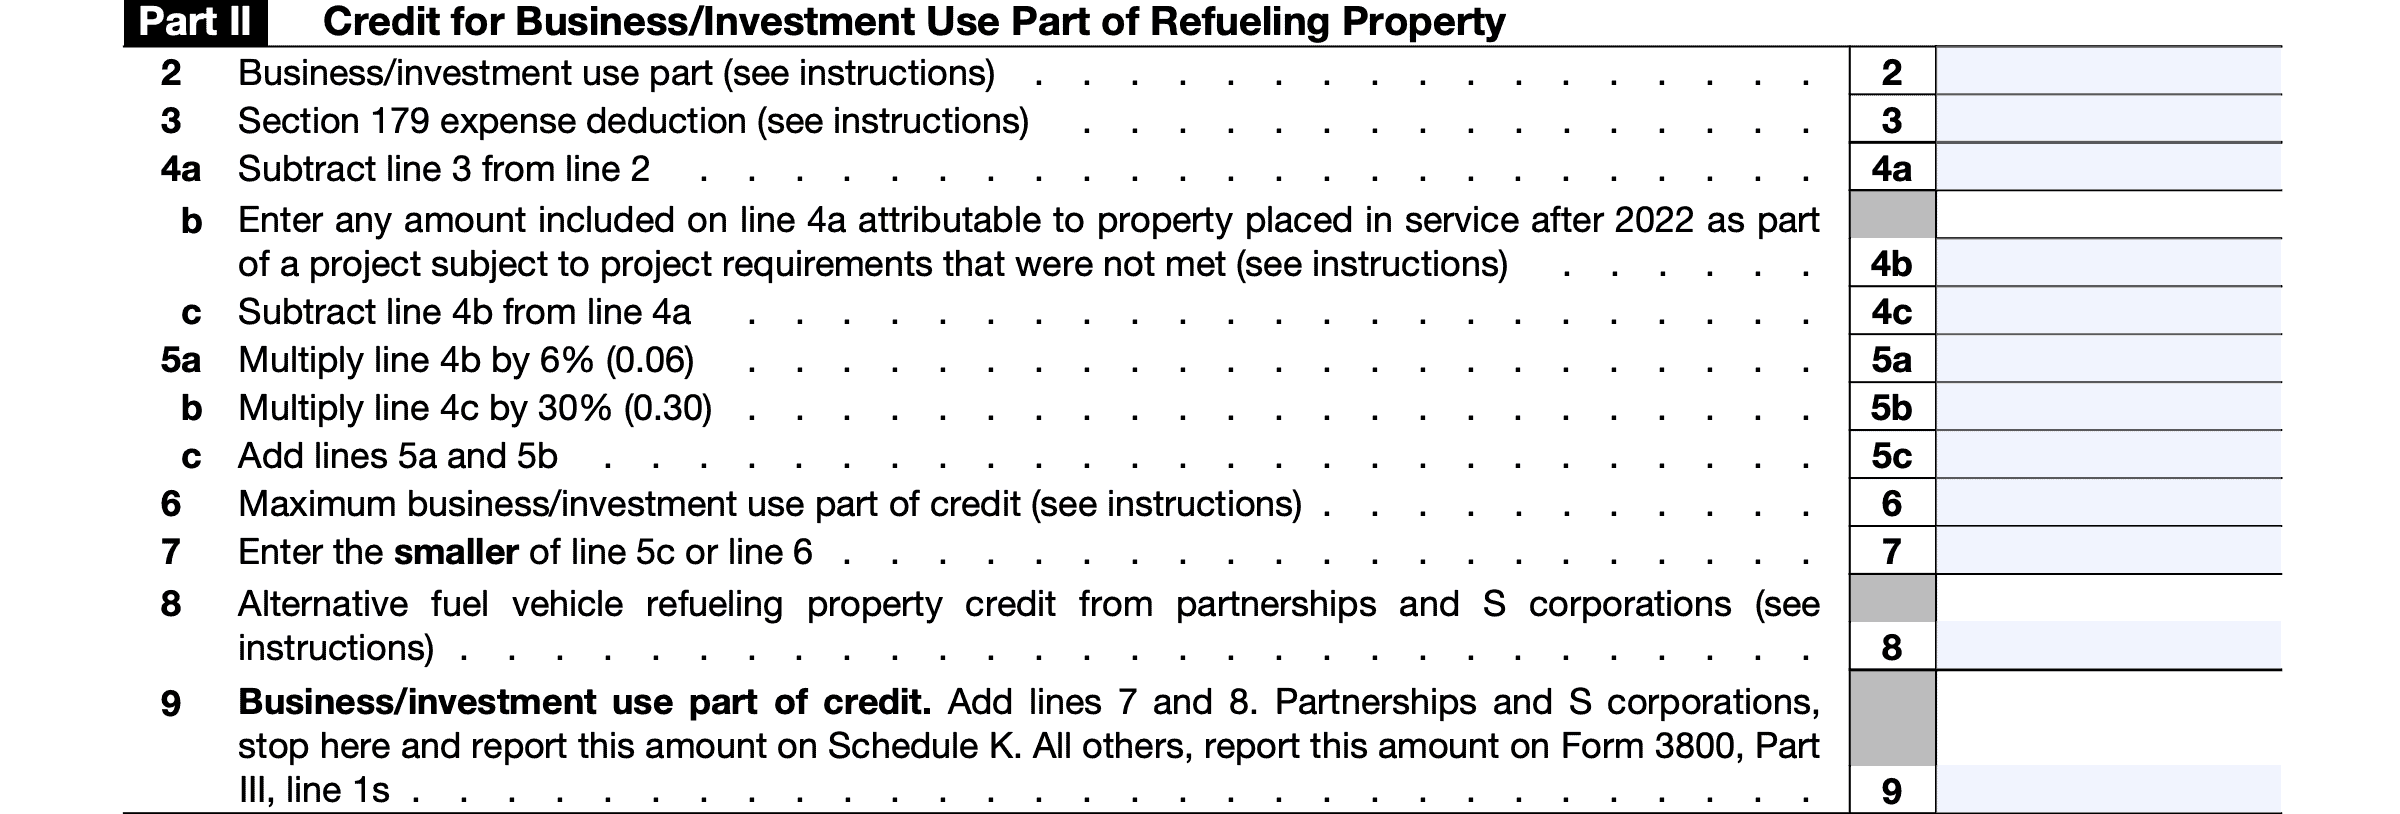 irs form 8911, part II: credit for business/investment use part of refueling property